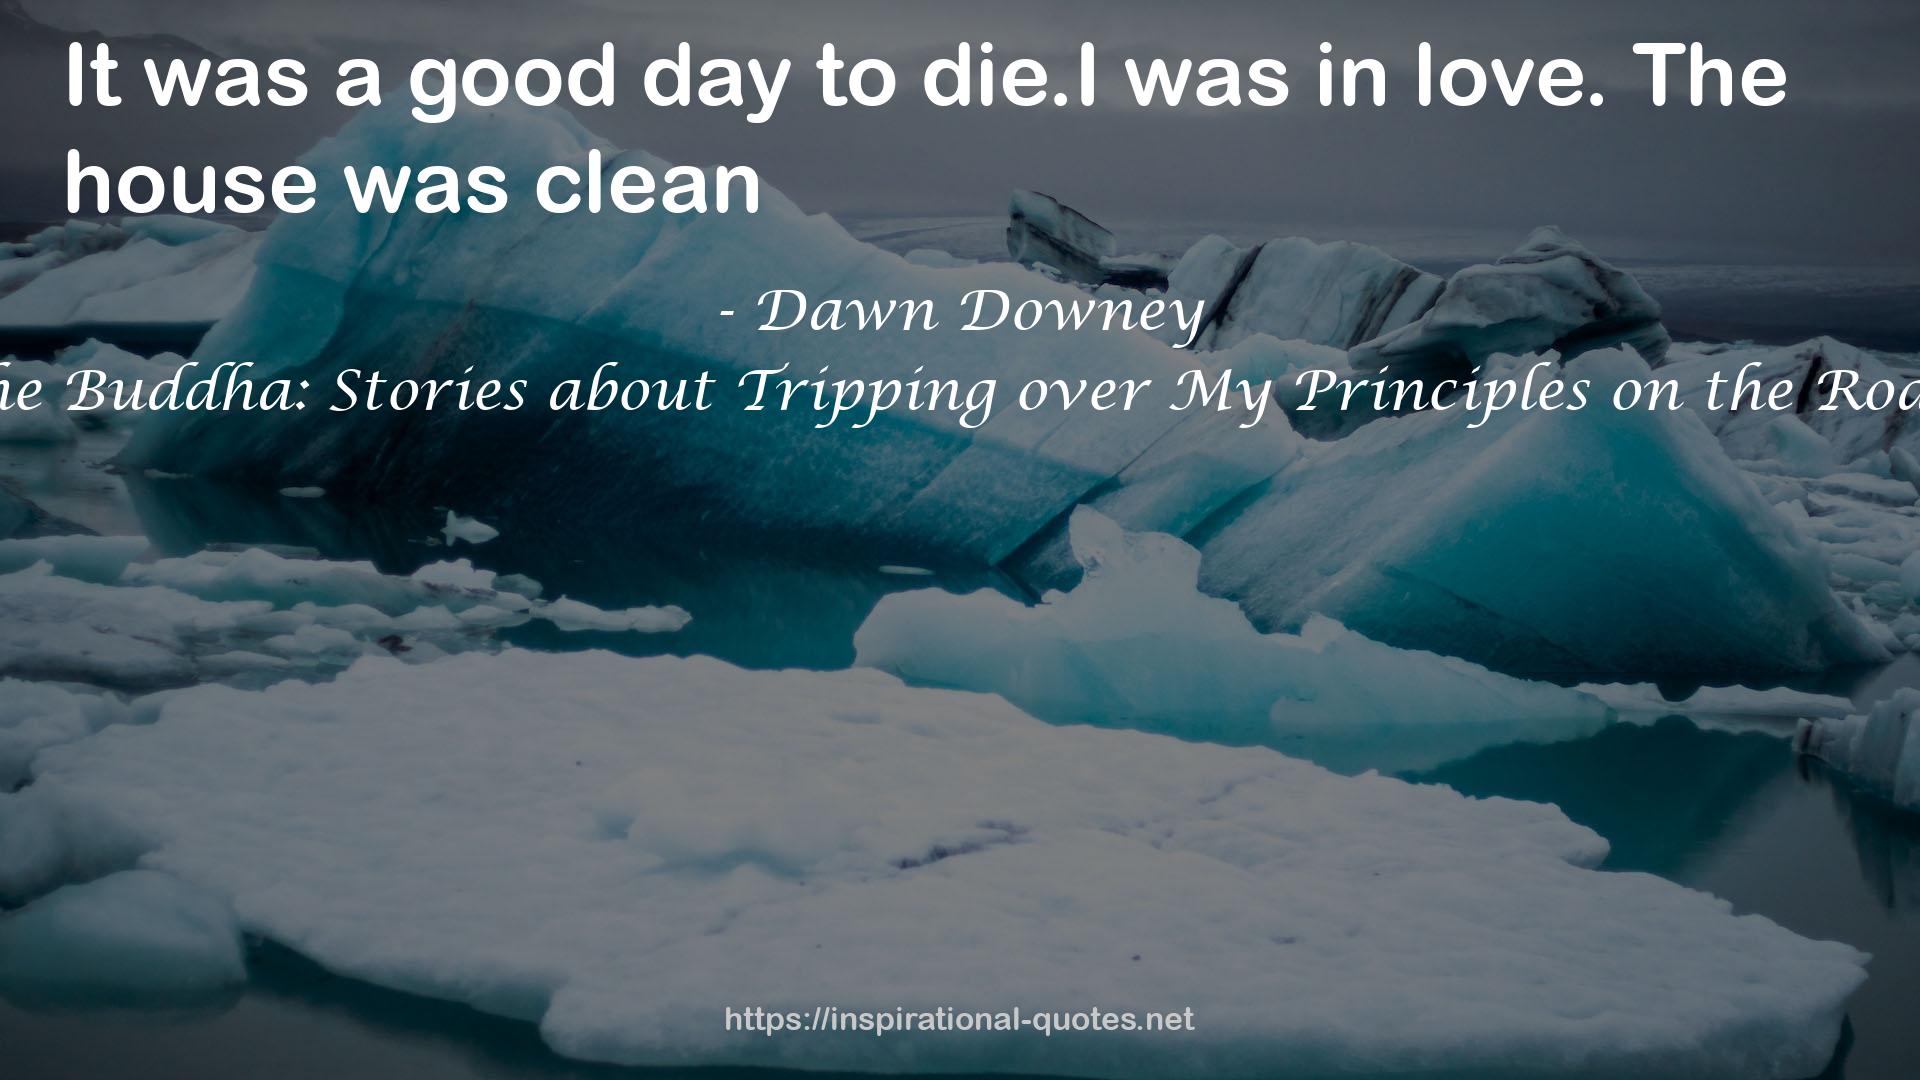 Dawn Downey QUOTES